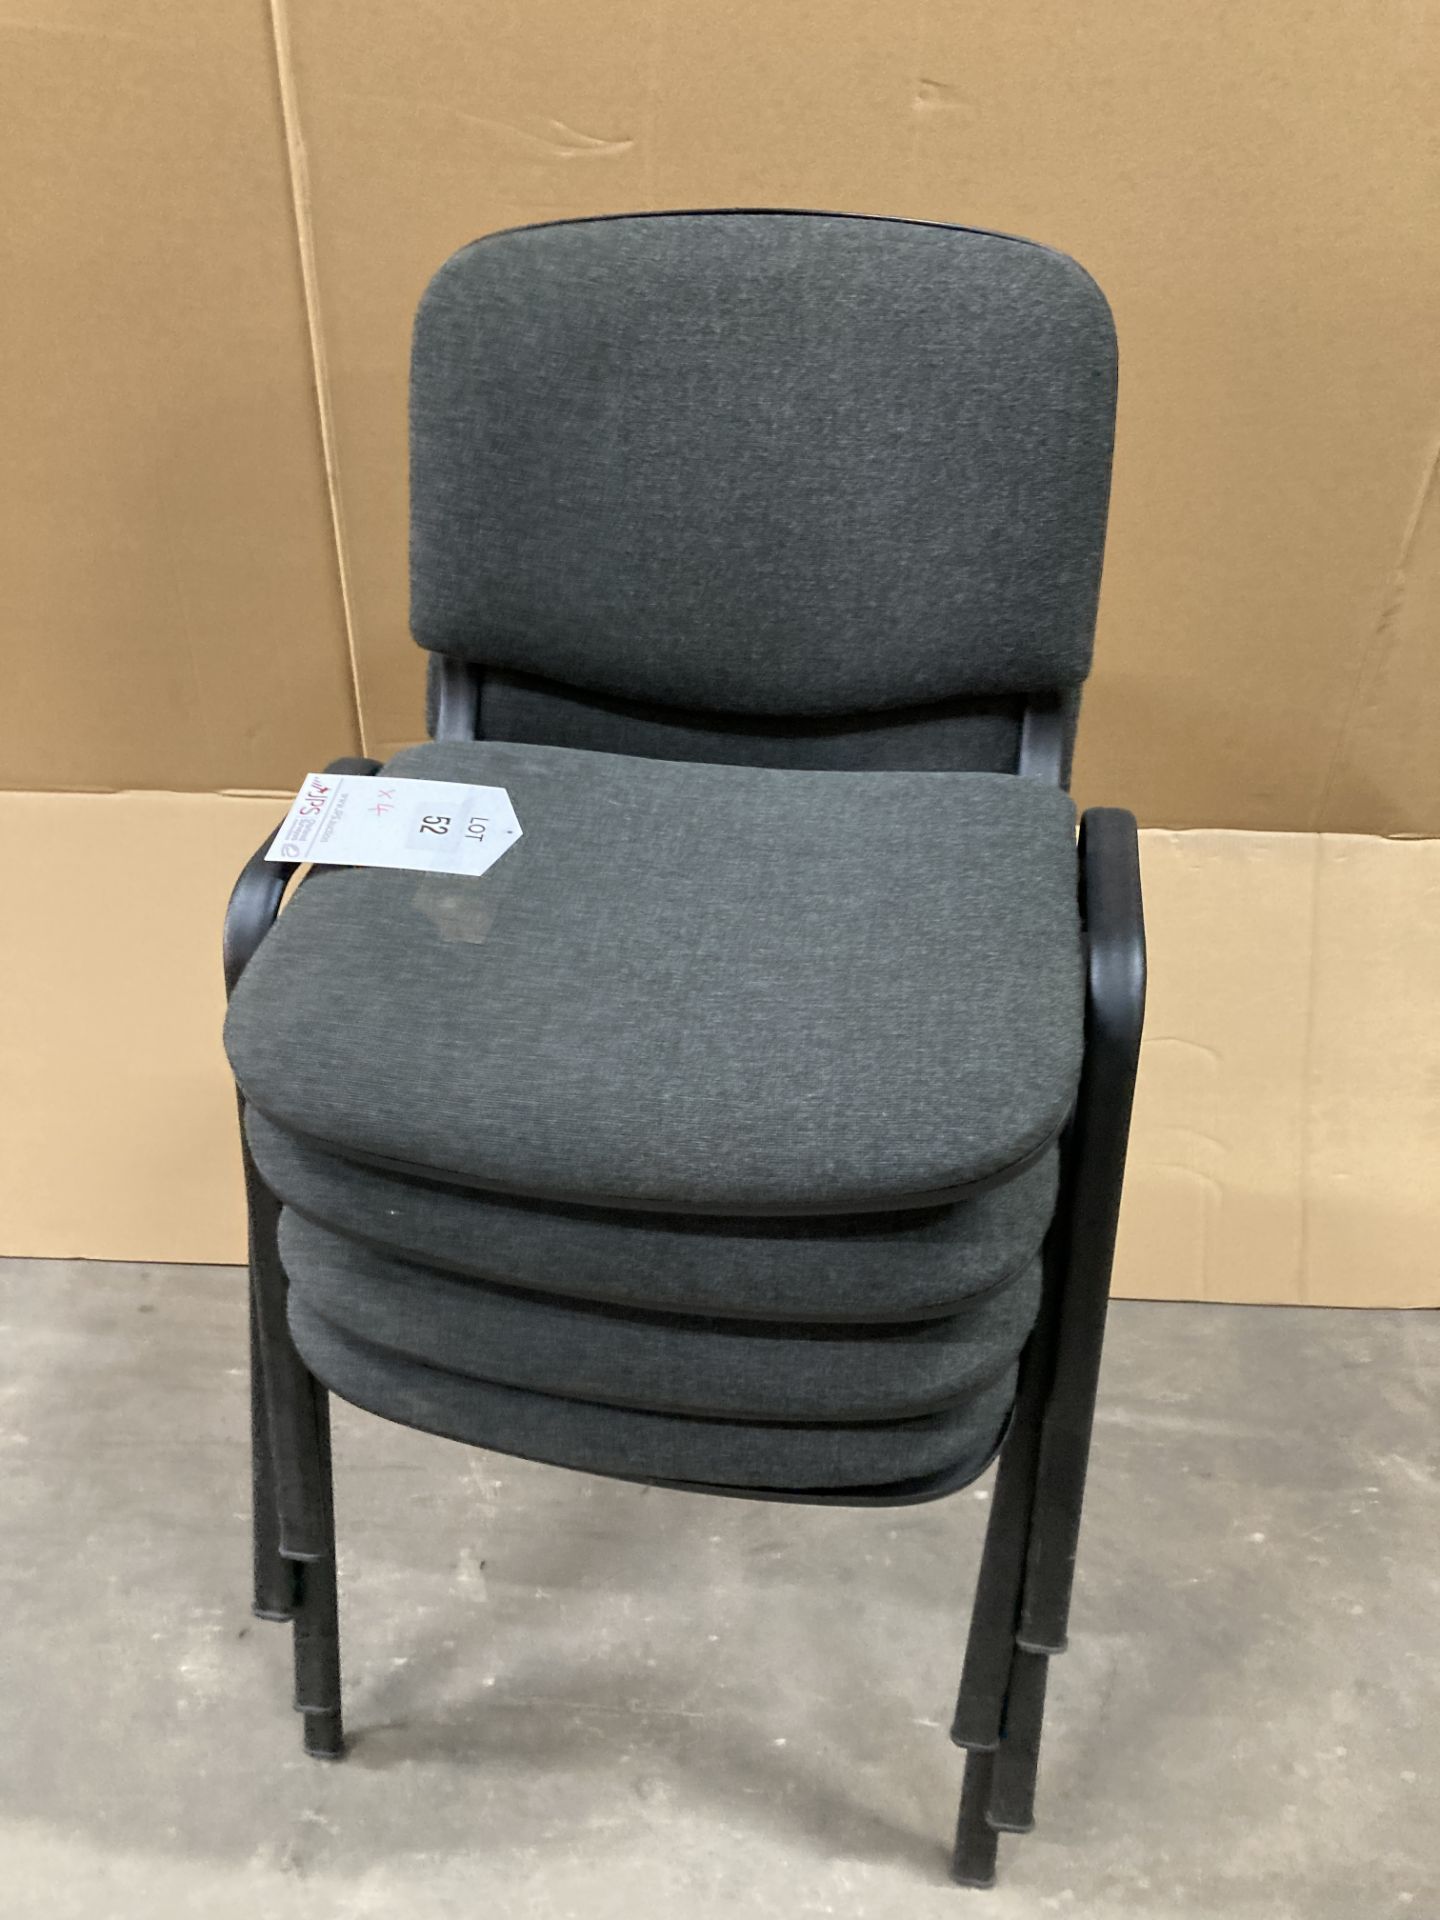 4 x Black Steel Office Chairs